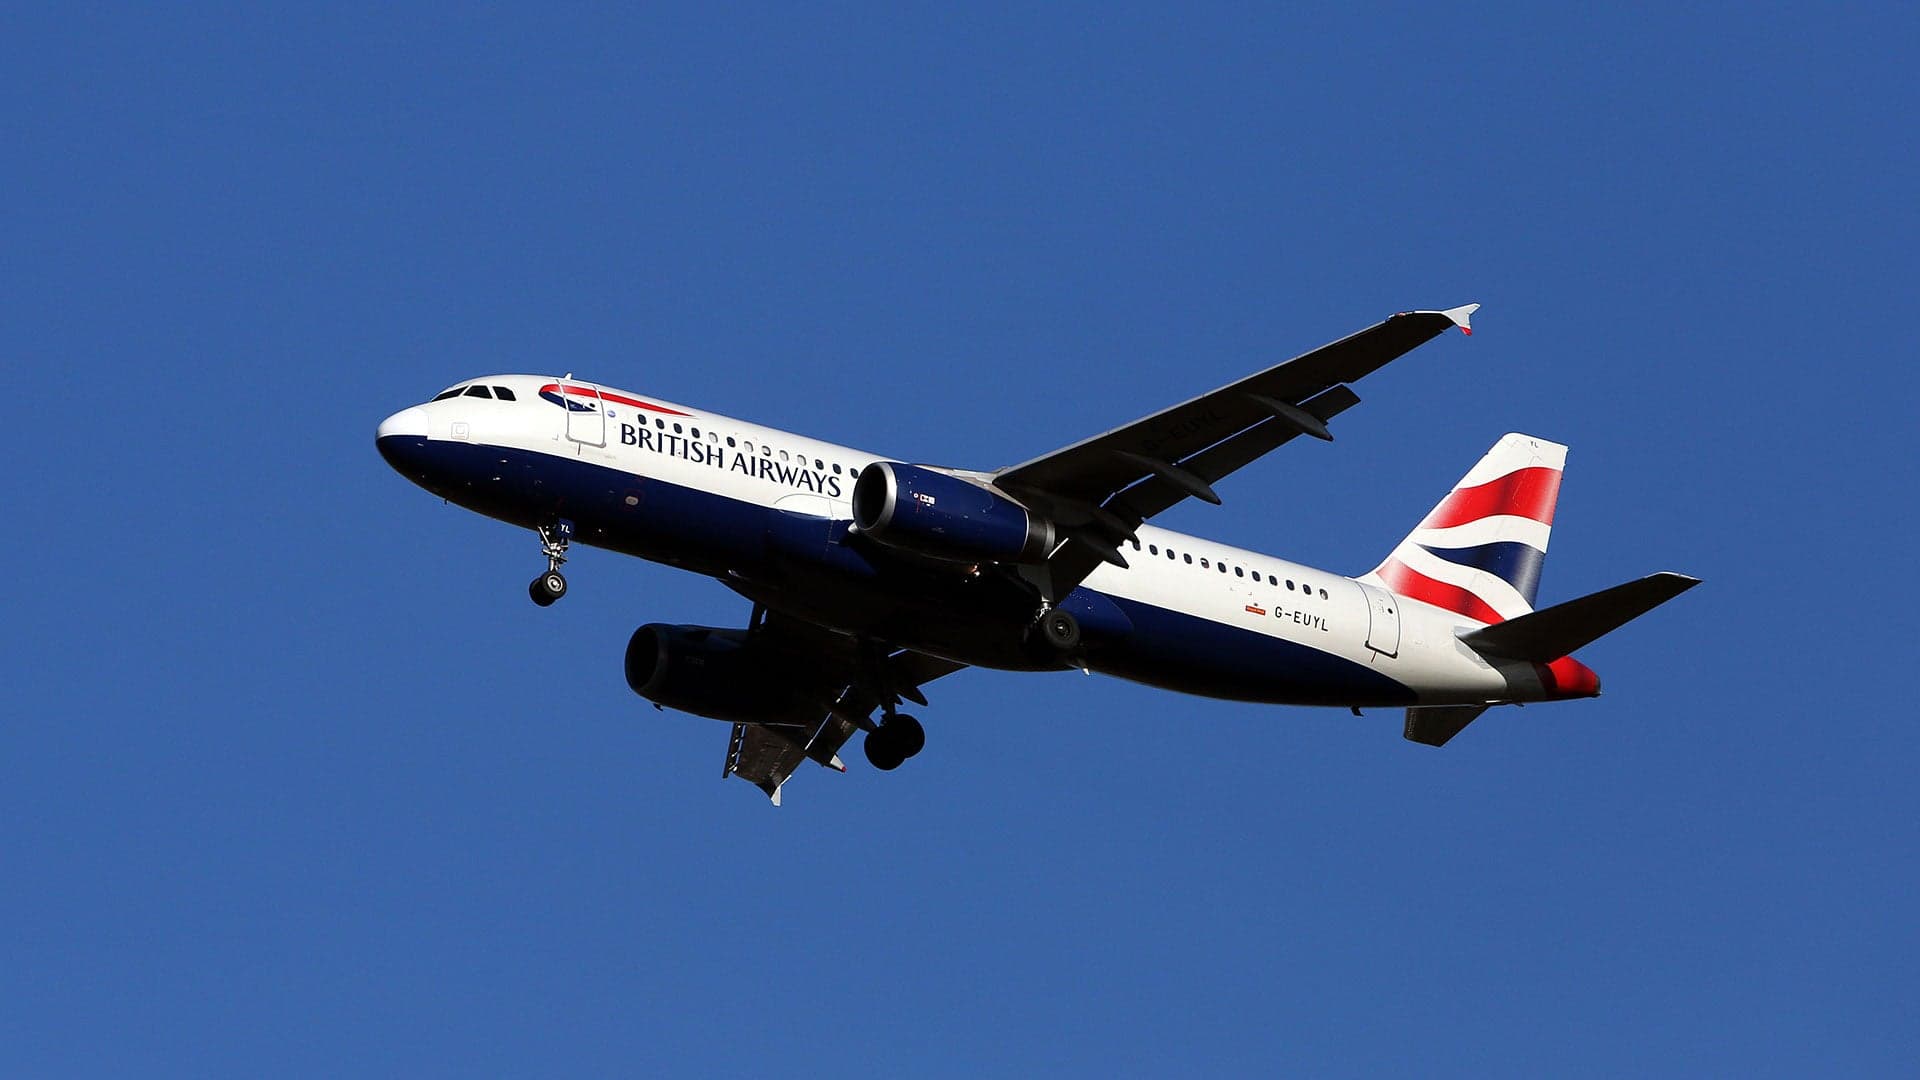 “Drone” That Hit British Airways Jet Might Have Been a Plastic Bag